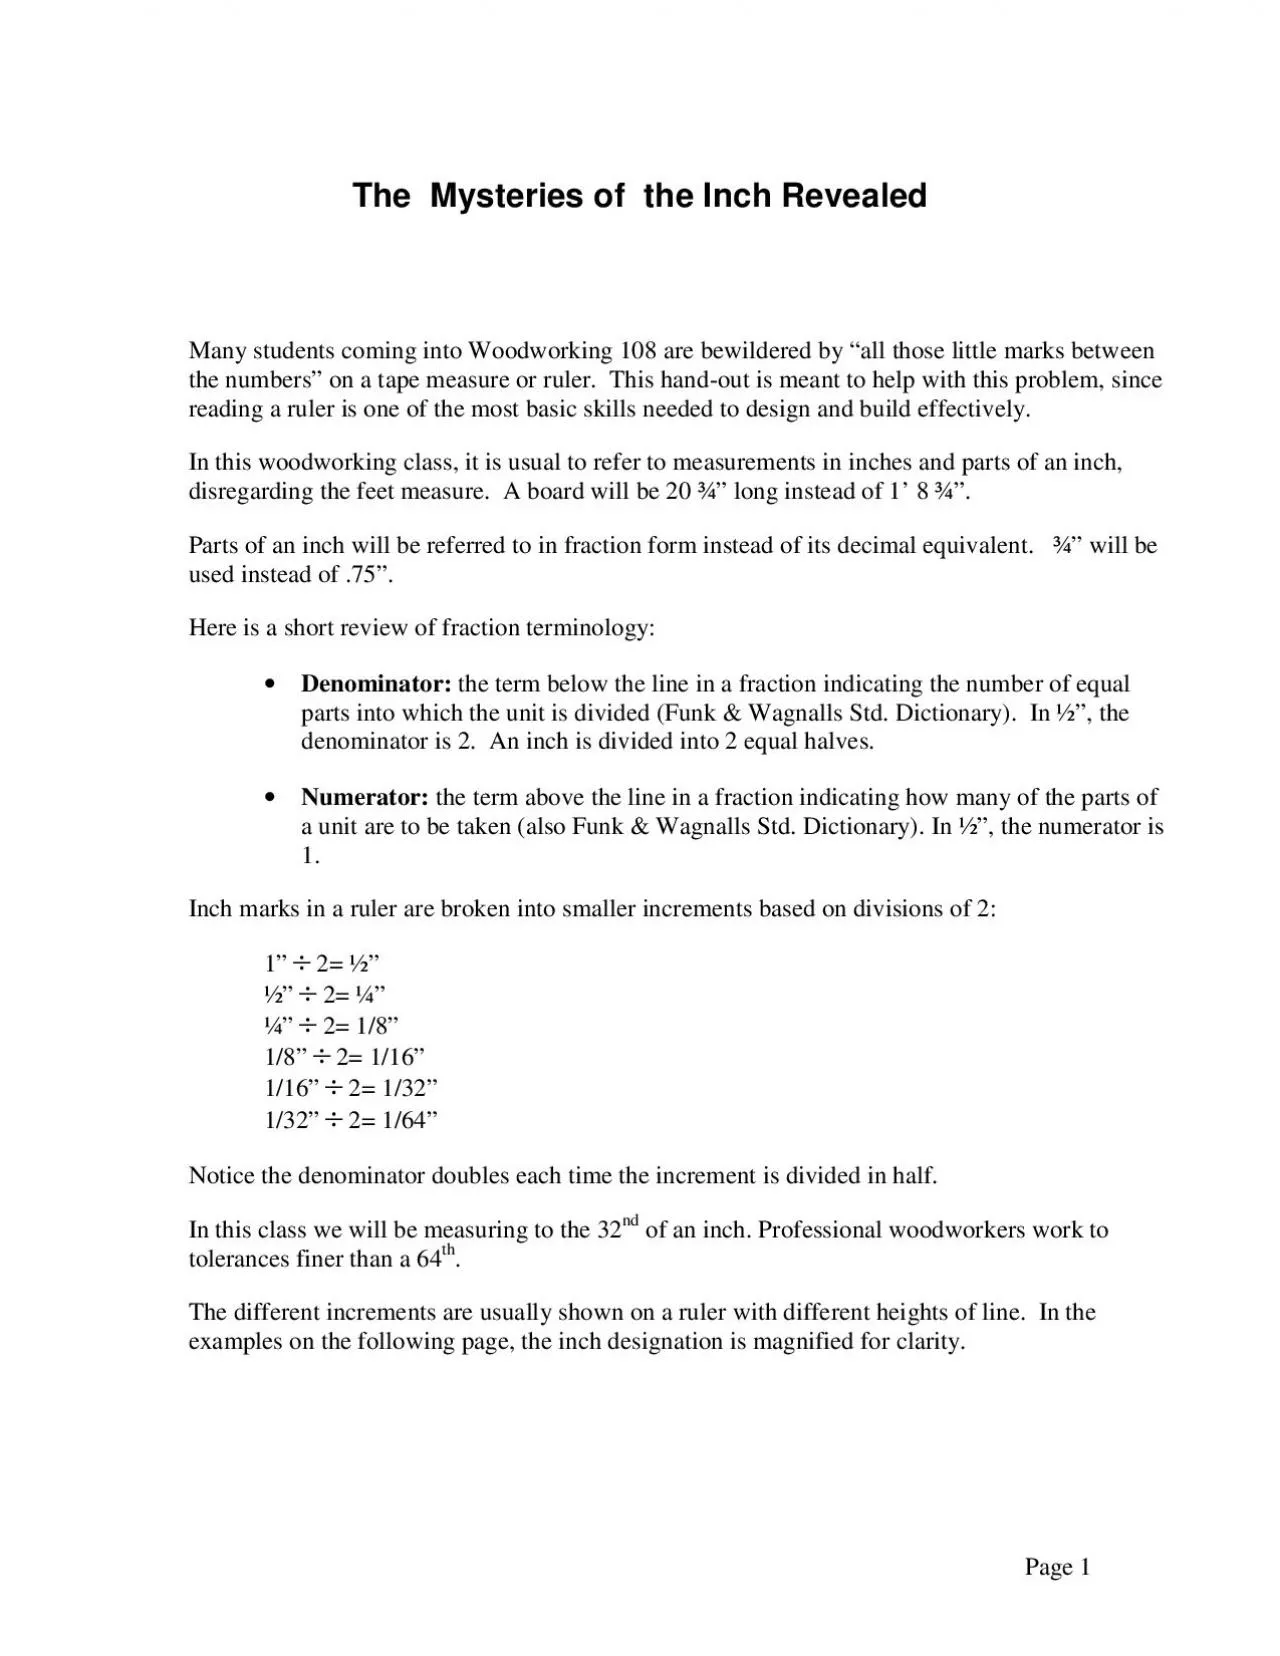 Page 1The  Mysteries of  the Inch RevealedMany students coming into Wo